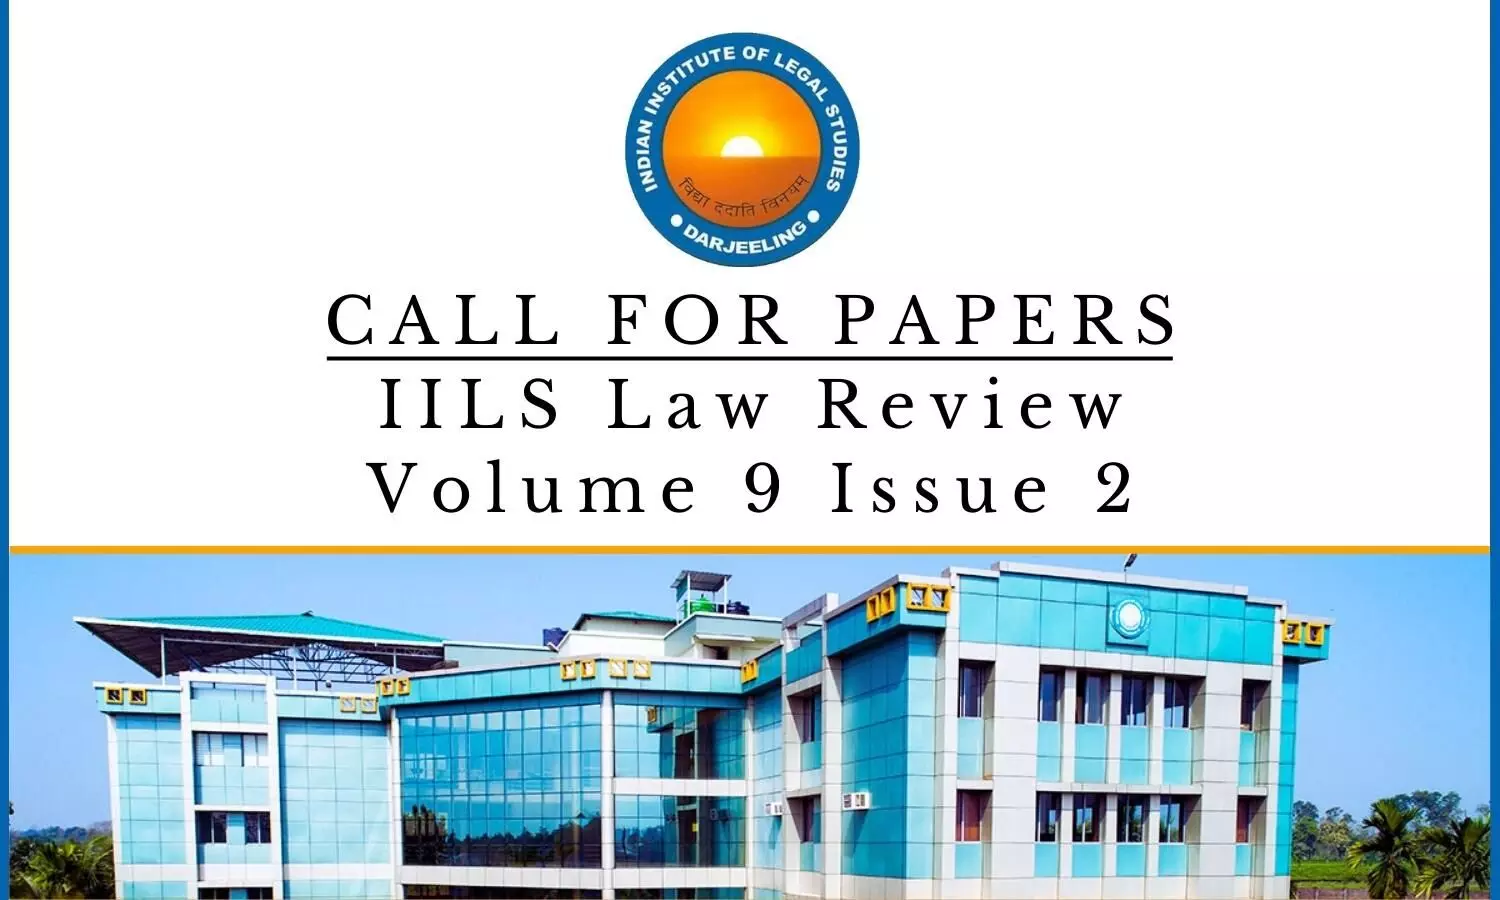 Call for Papers: IILS Law Review Volume 9 Issue 2